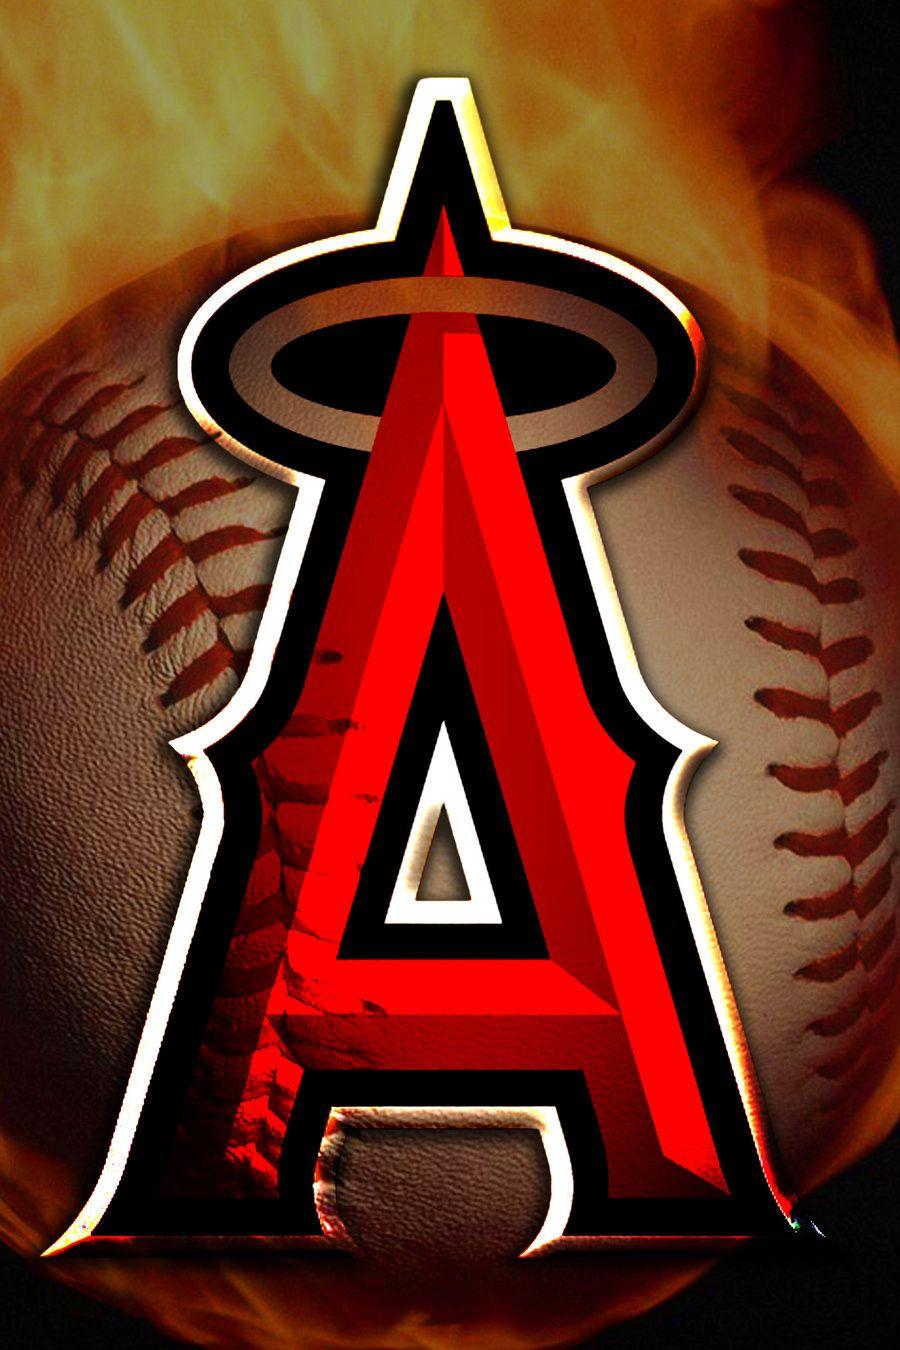 Los Angeles Angels Wallpapers Wallpaper Cave